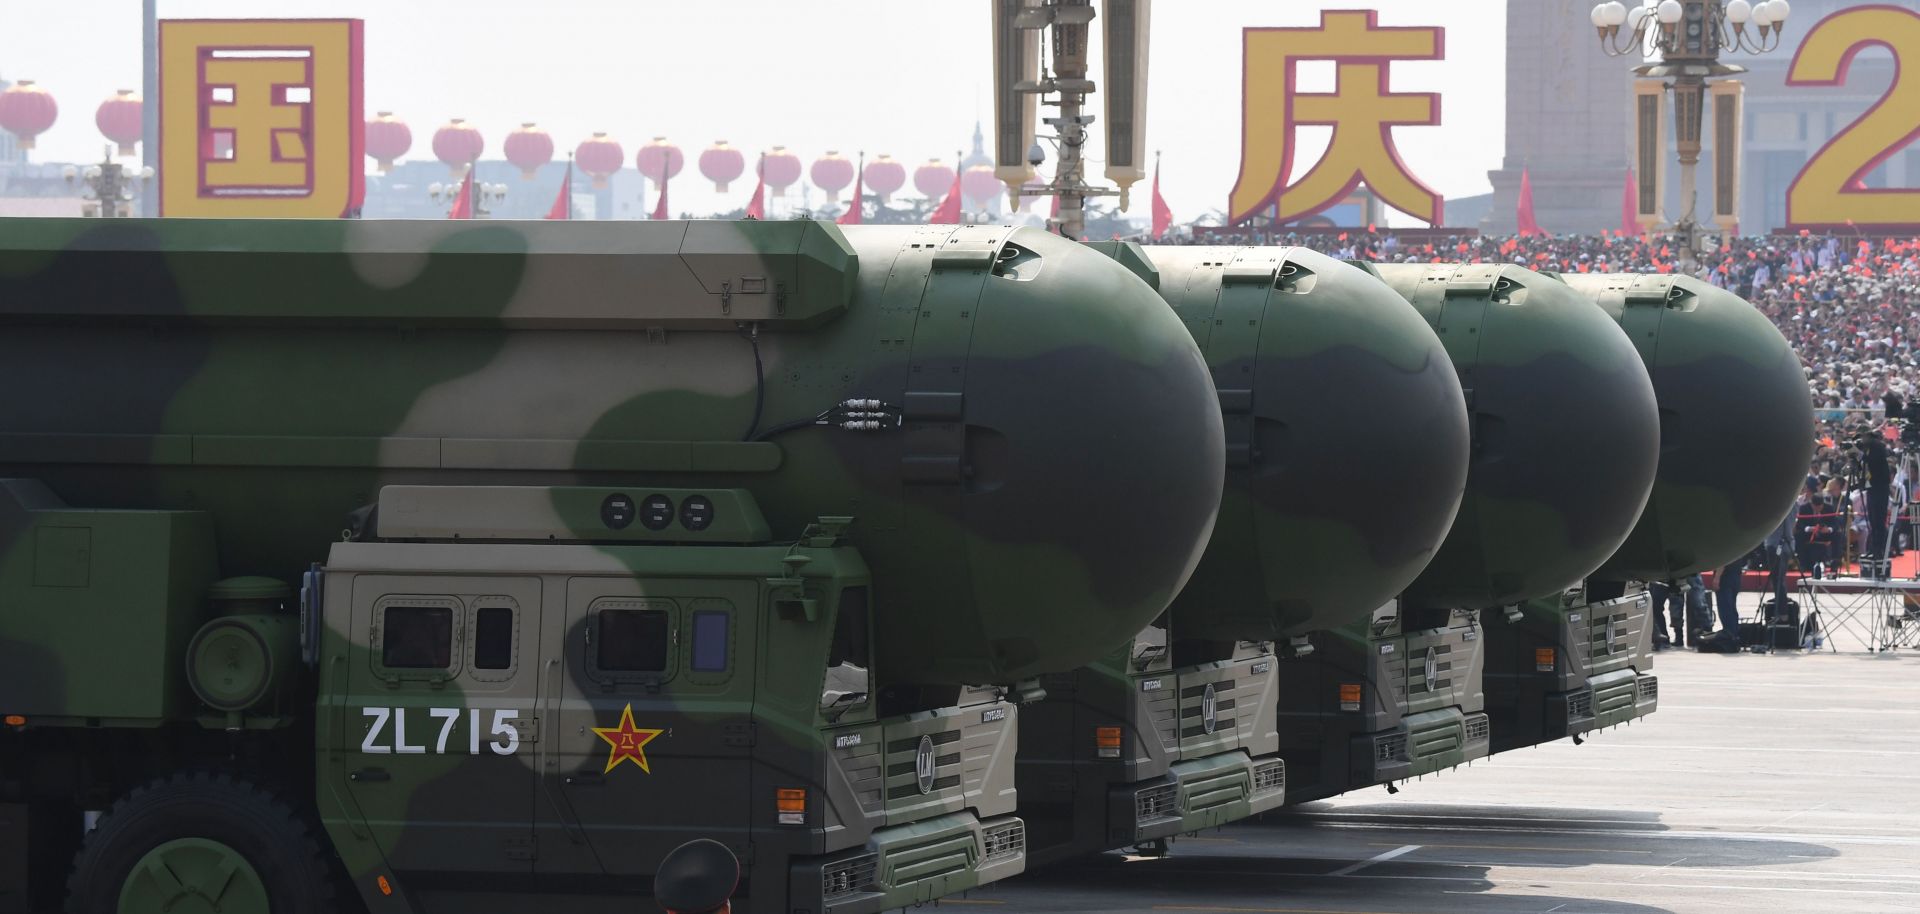 Nuclear-capable ballistic missiles are displayed during a military parade at Tiananmen Square in Beijing, China, on Oct. 1, 2019. 